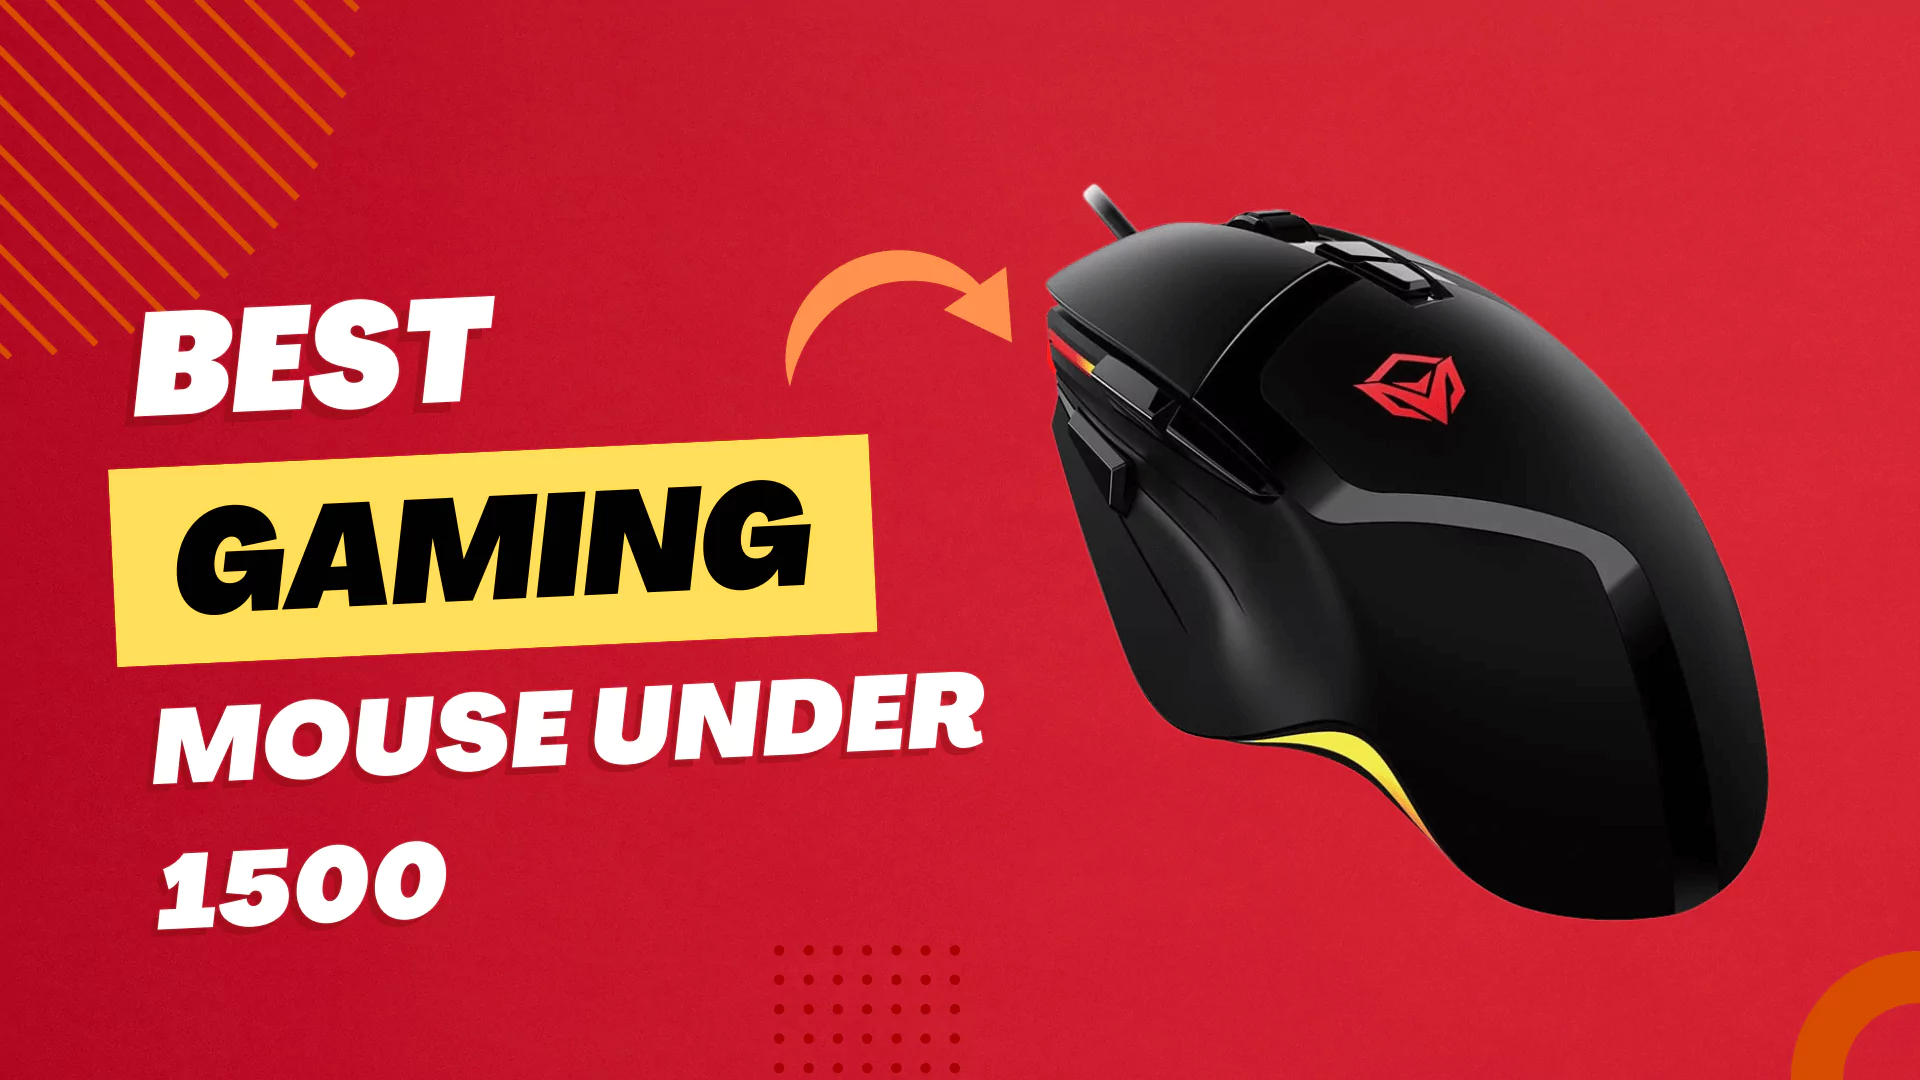 Best Gaming Mouse Under 1500